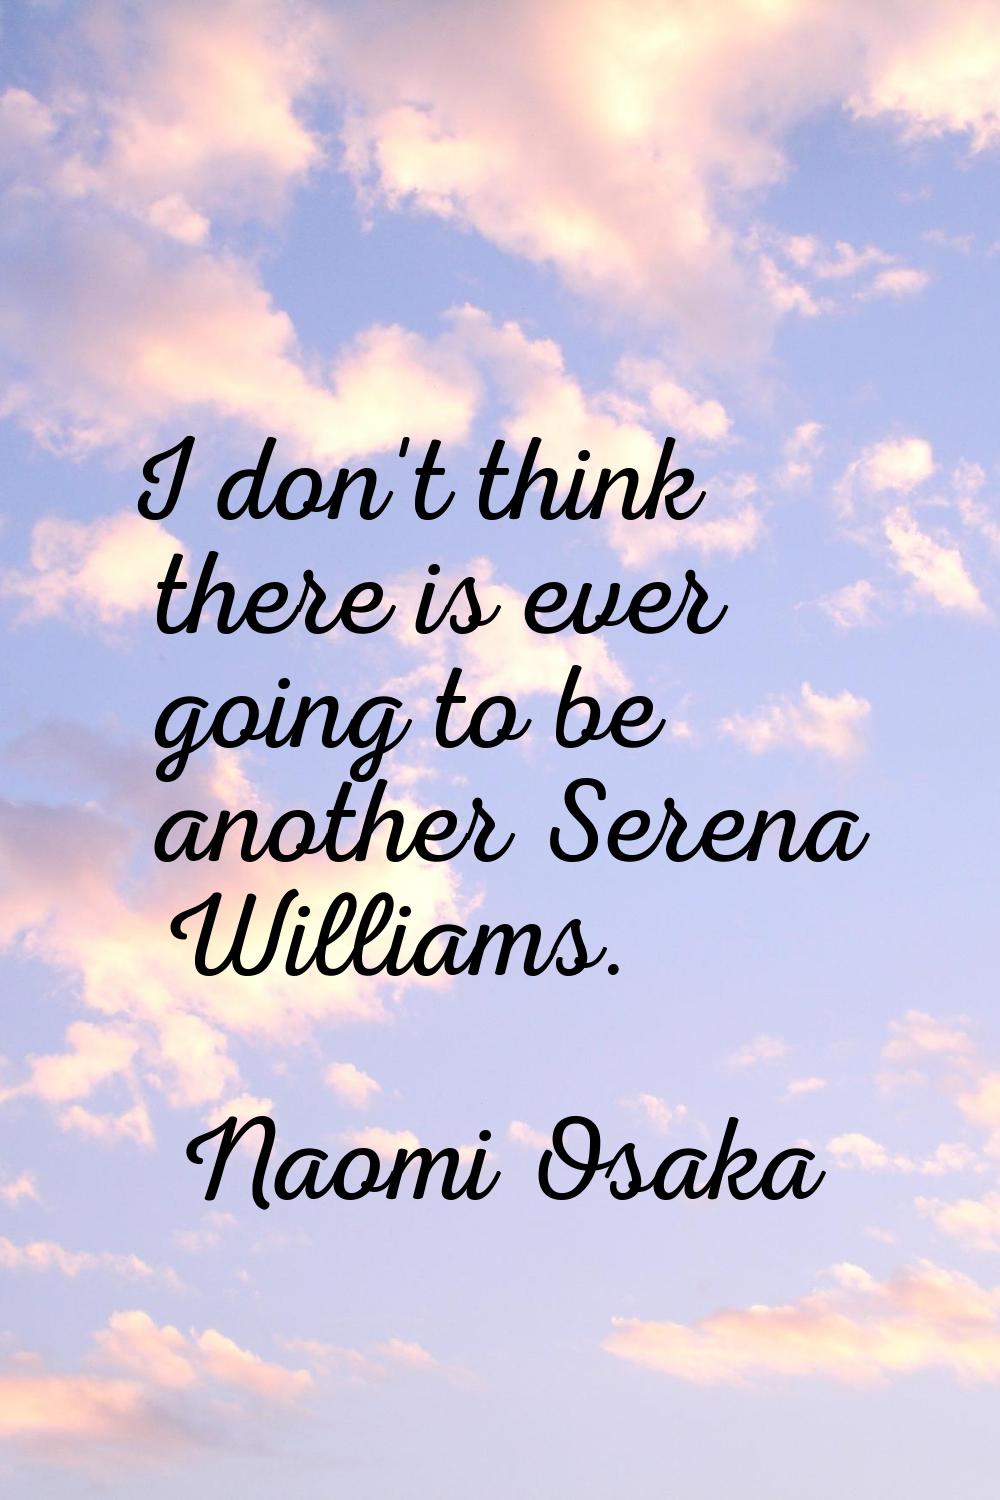 I don't think there is ever going to be another Serena Williams.